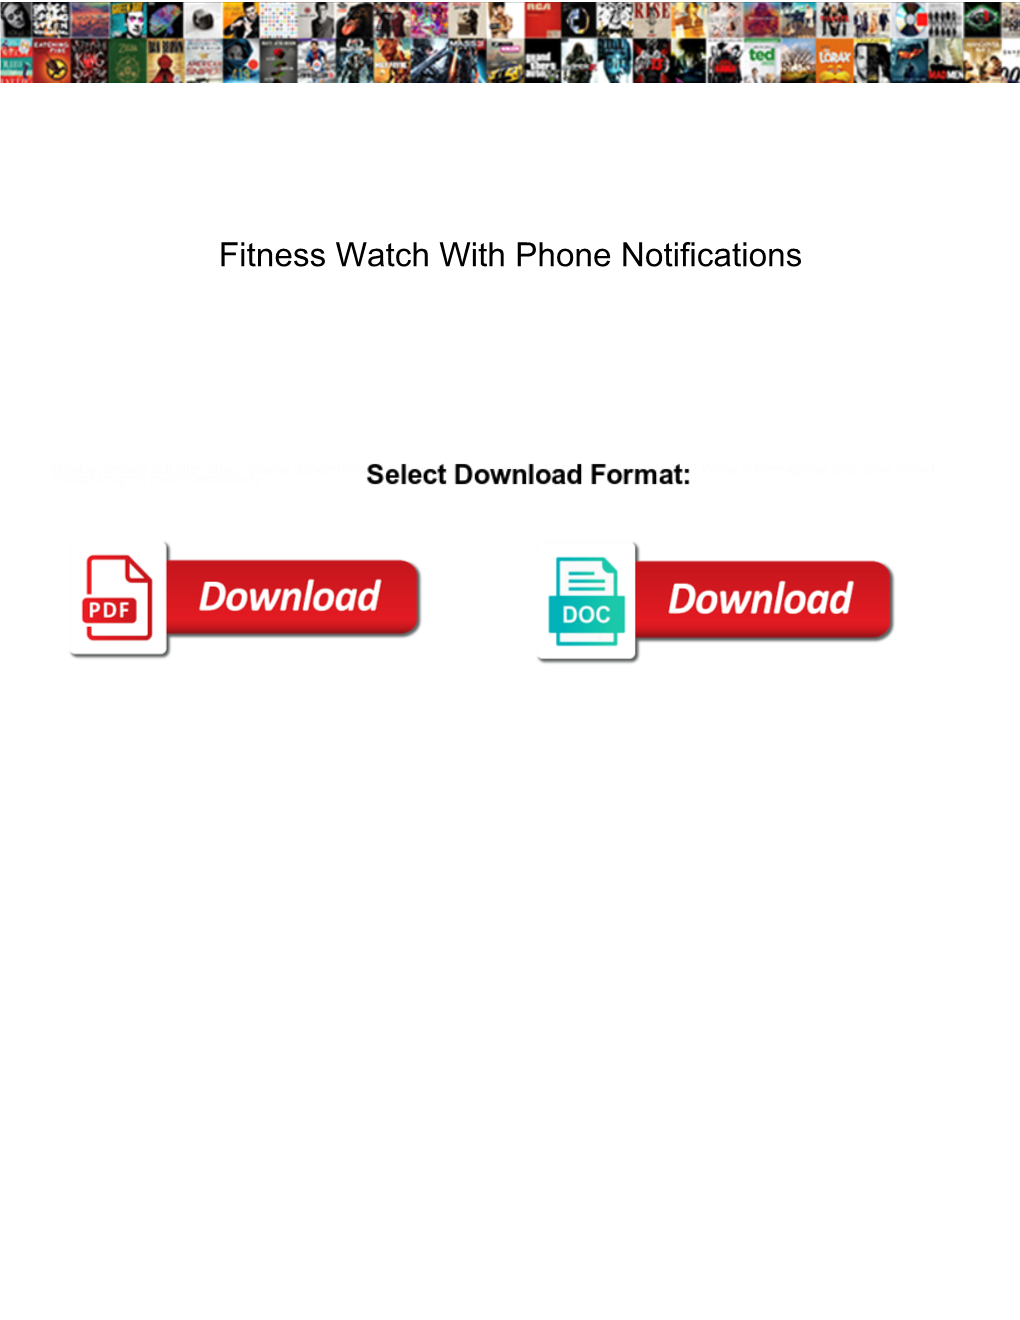 Fitness Watch with Phone Notifications